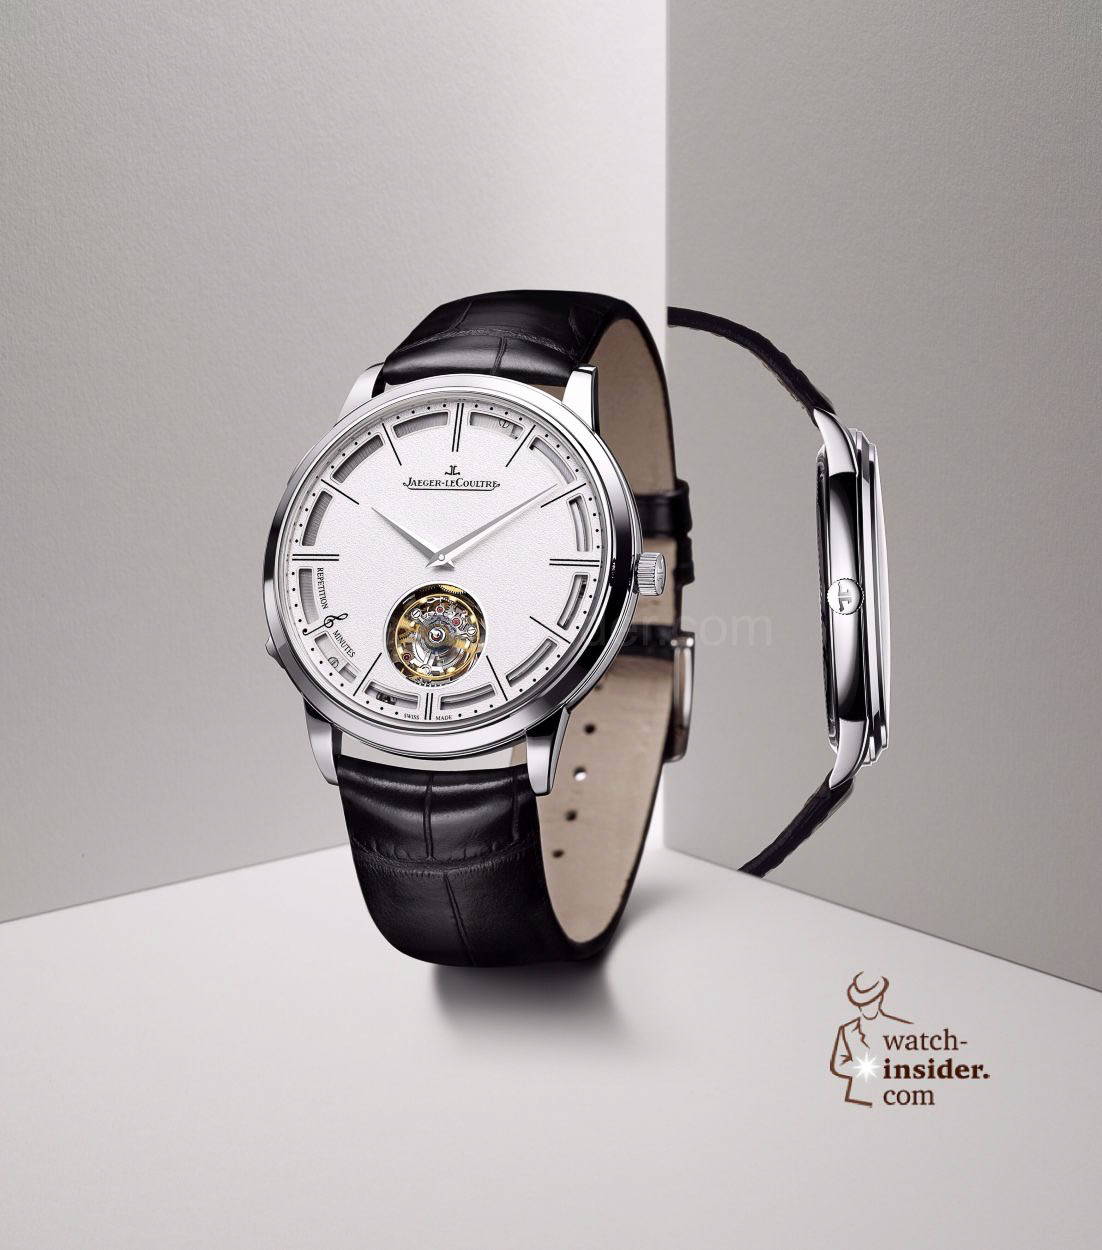 Pre-SIHH 2014: Jaeger-LeCoultre Master Ultra Thin Minute Repeater Flying Tourbillon